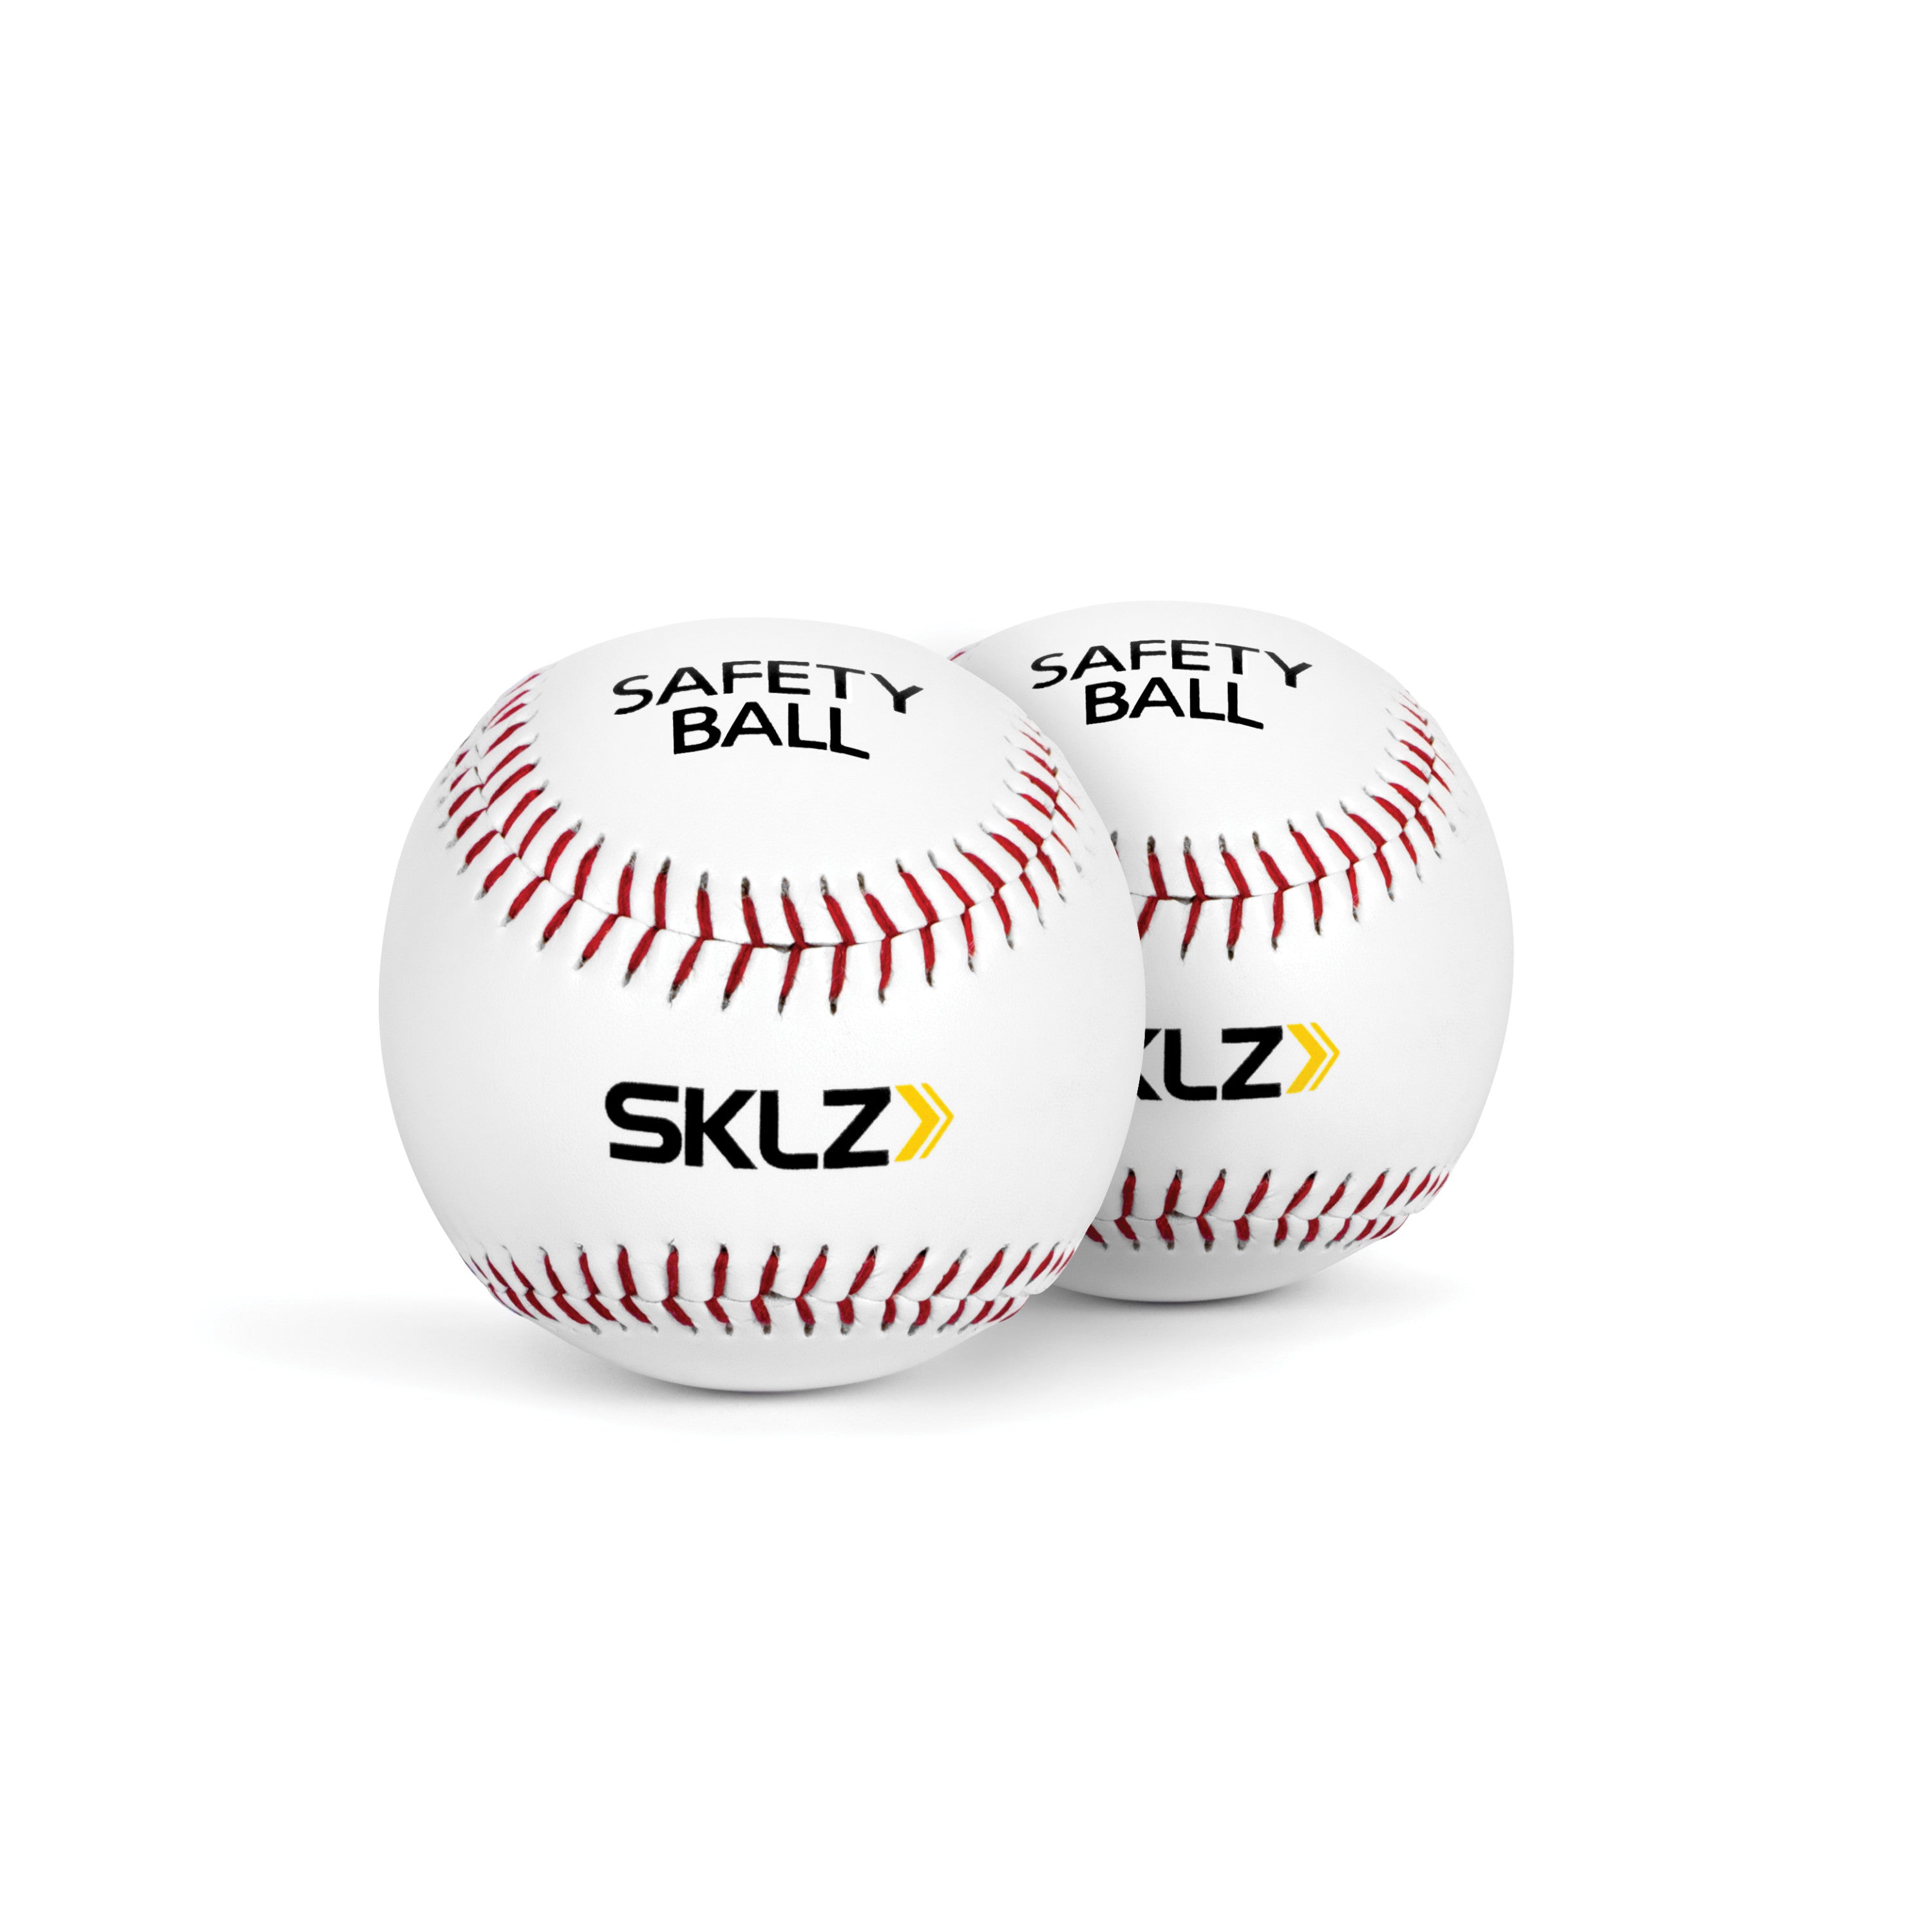 SKLZ Safety Balls - Buy now online with delivery in 1-2 days in UAE, Dubai, Abu-Dhabi. 